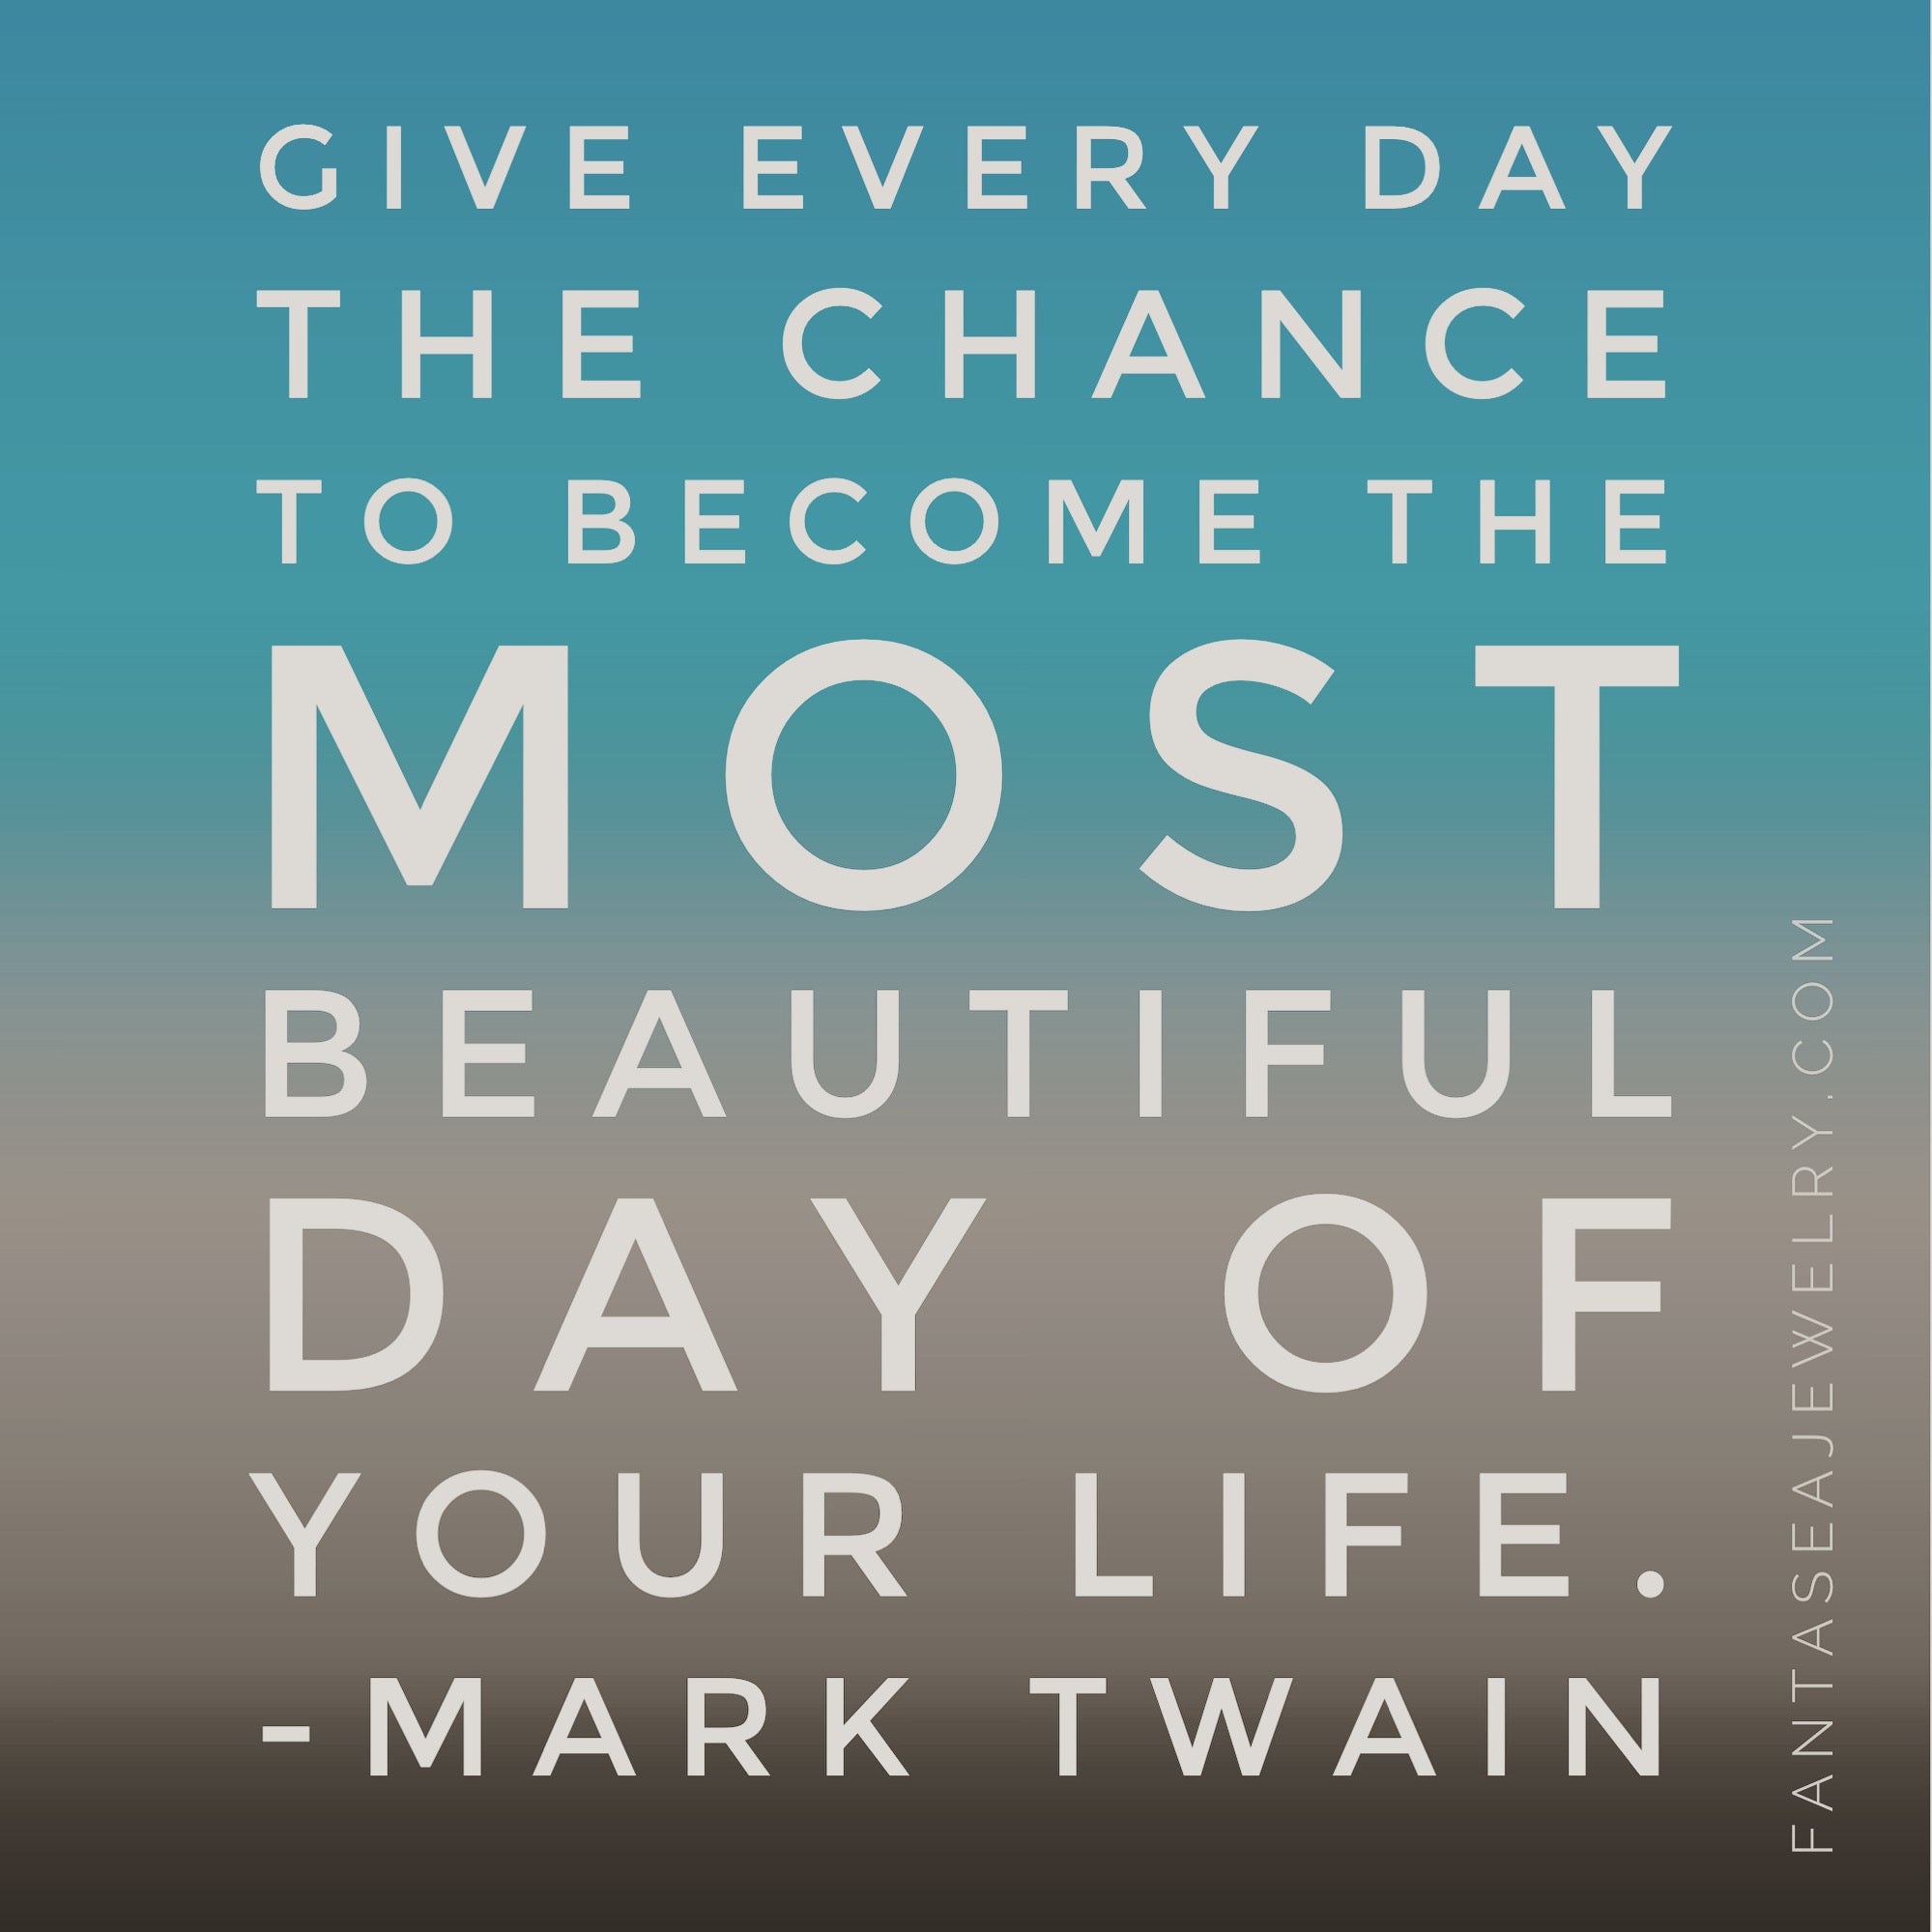 Mark Twain Beautiful Day of Your Life Quote